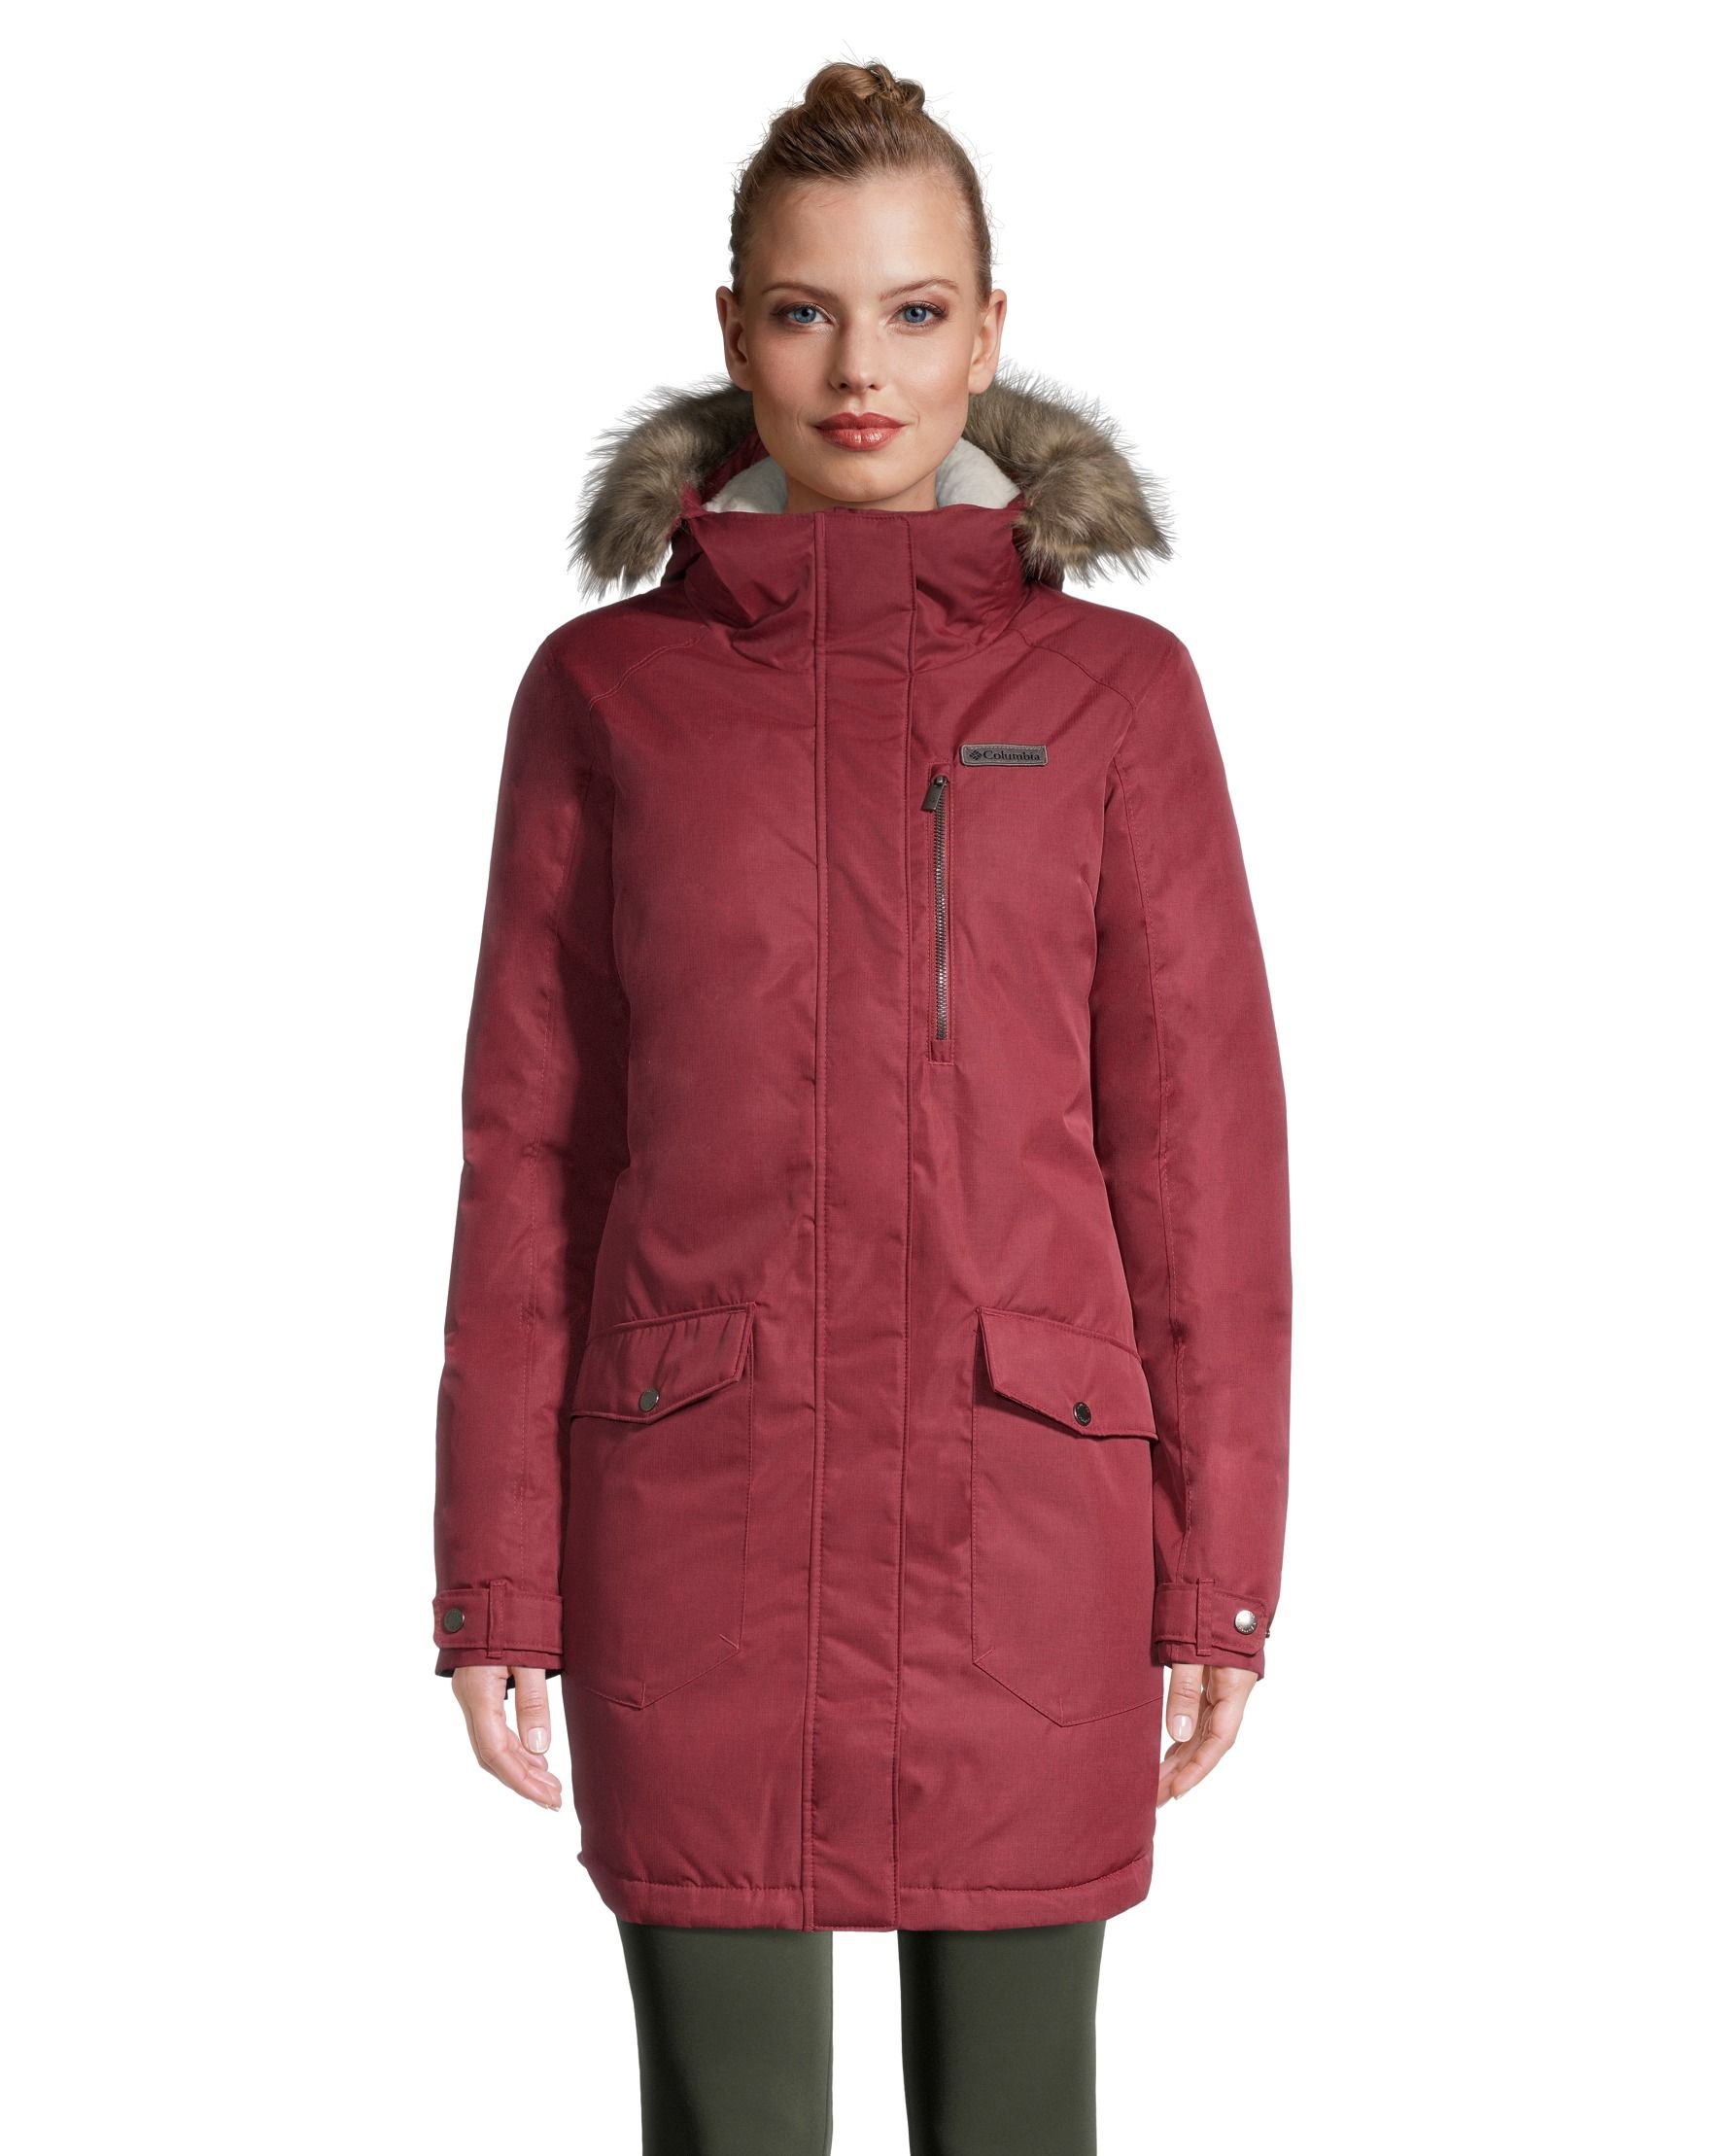 https://media-www.sportchek.ca/product/div-03-softgoods/dpt-76-outerwear/sdpt-02-womens/333255414/columbia-women-s-suttle-mntn-marsala-red-xs--f6e75771-9ac4-4289-aa03-9c2bcc9c0b64-jpgrendition.jpg?imdensity=1&imwidth=1244&impolicy=mZoom